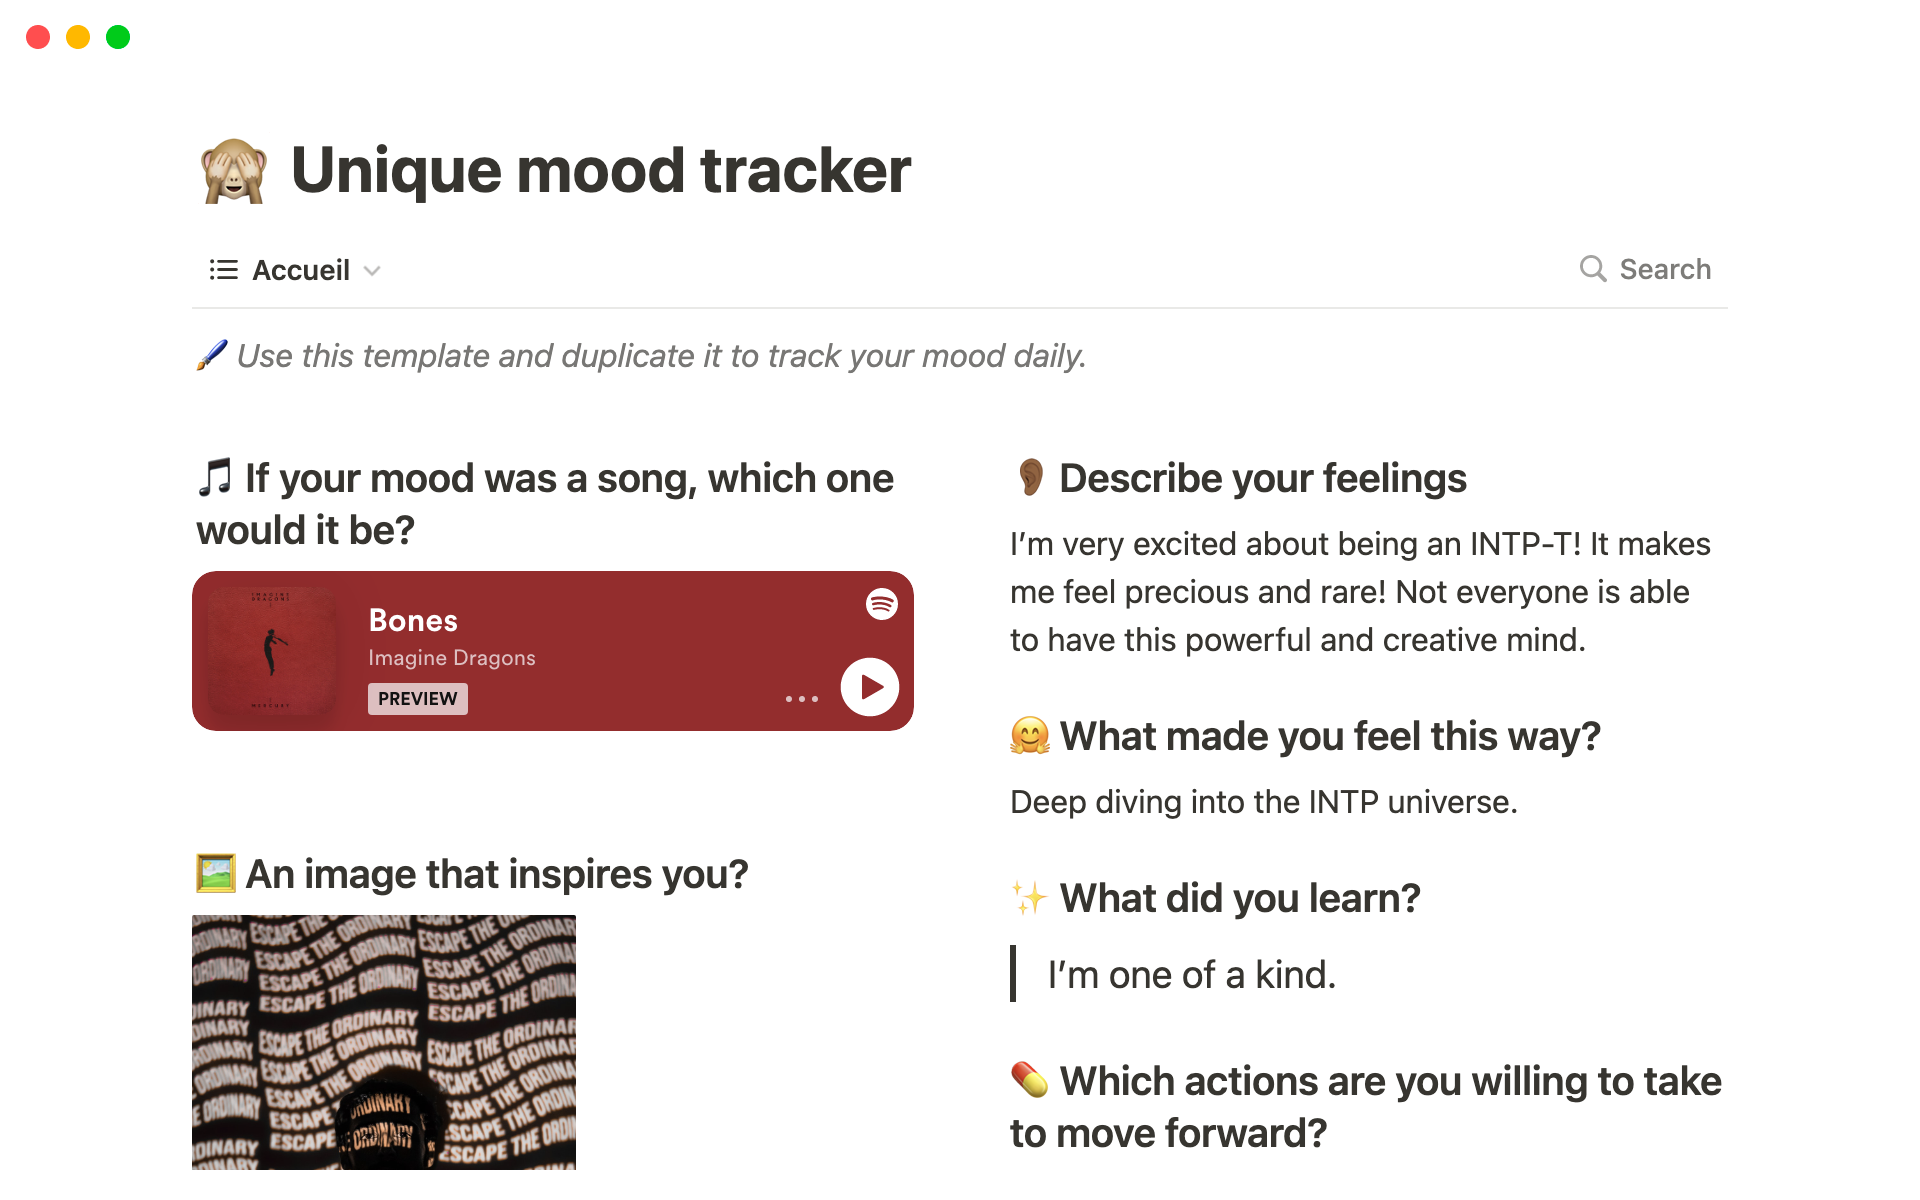 My template helps people work on their emotional intelligence by tracking their moods daily.